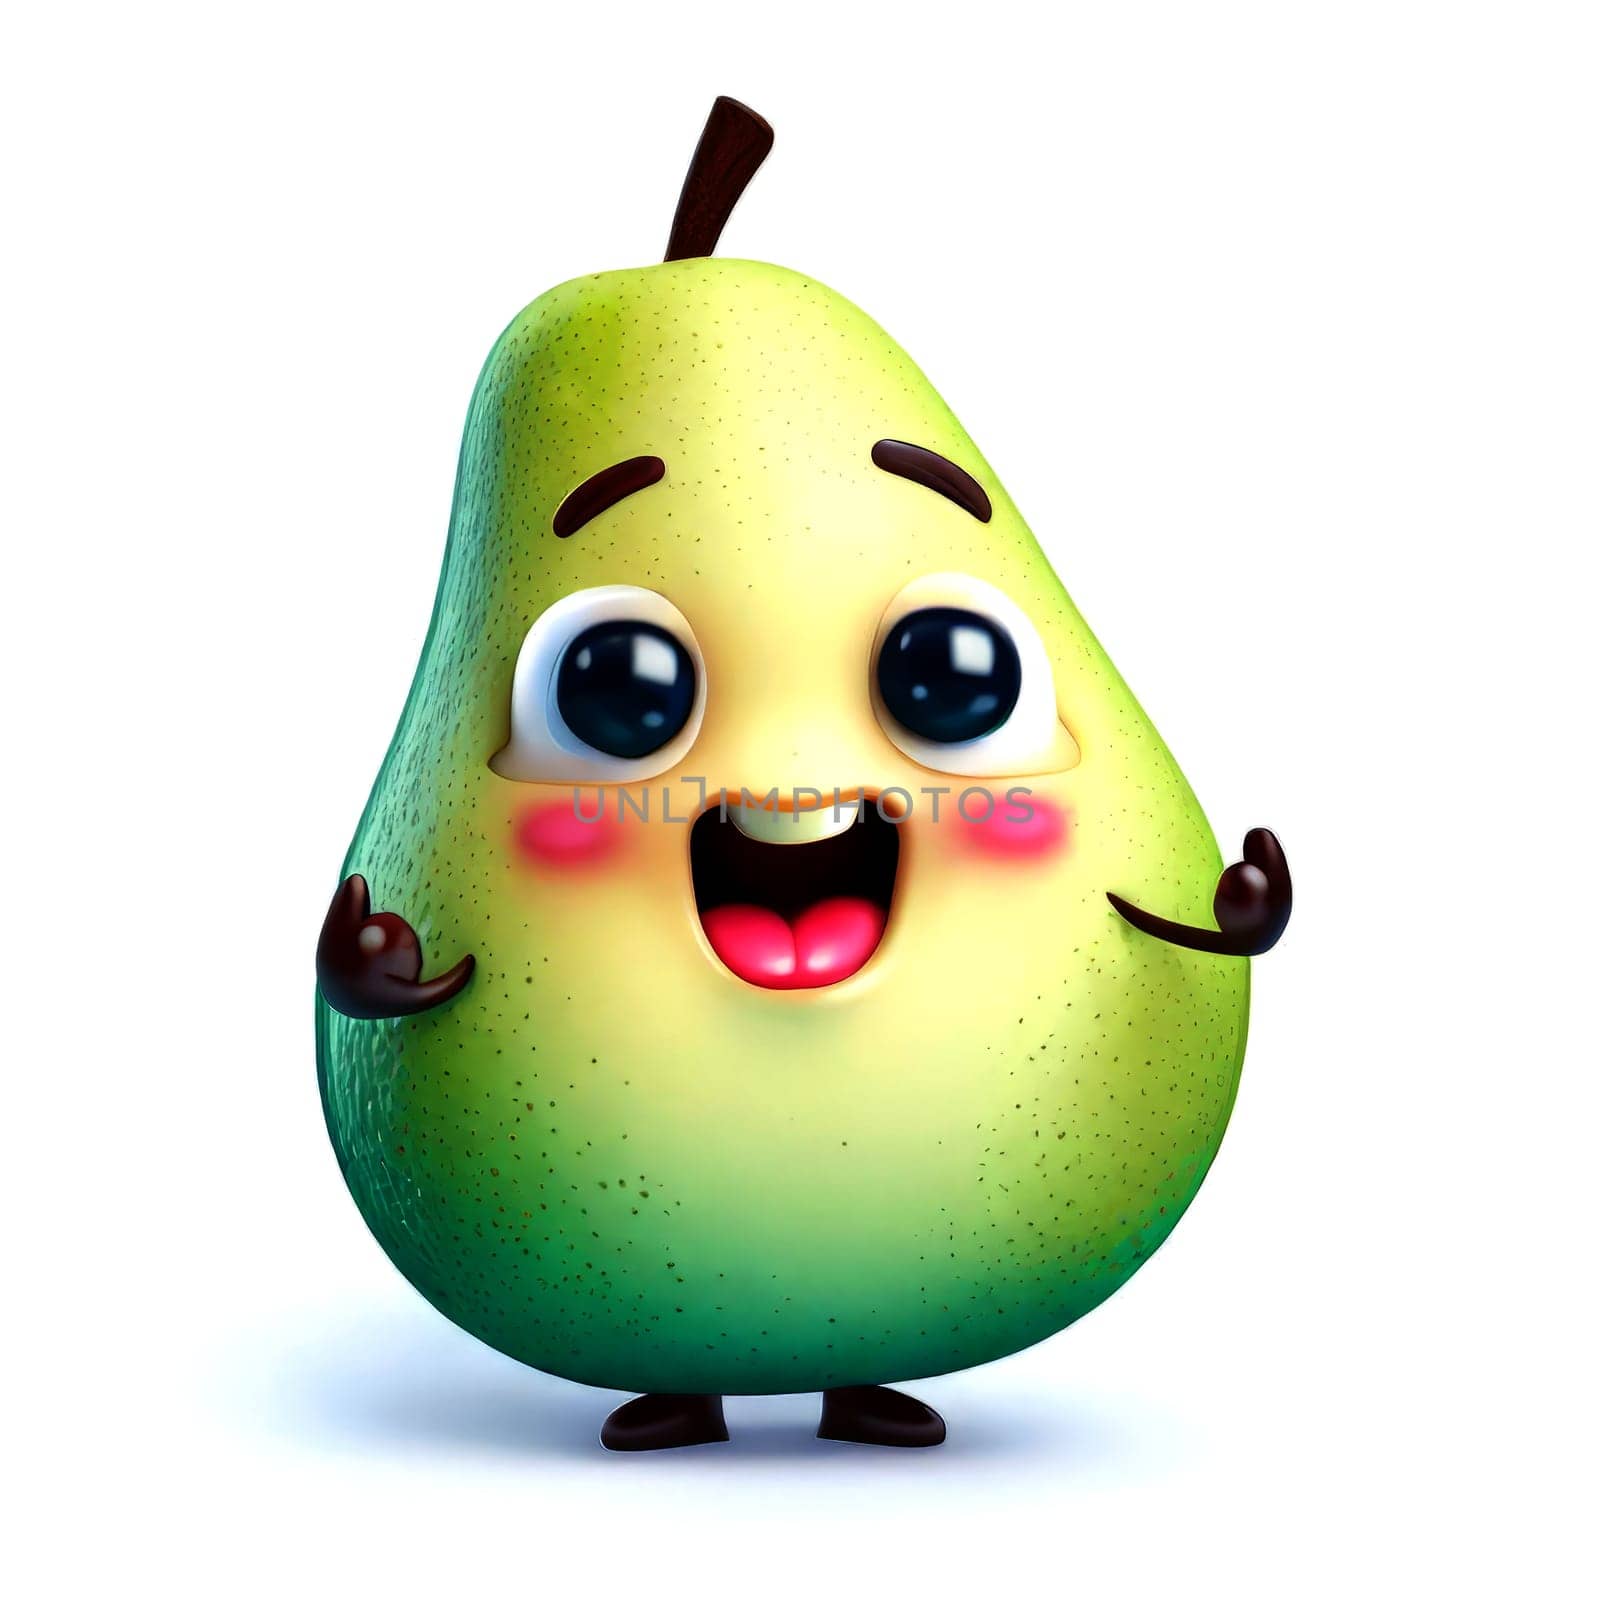 Cute cartoon 3d character of smiling pear by clusterx